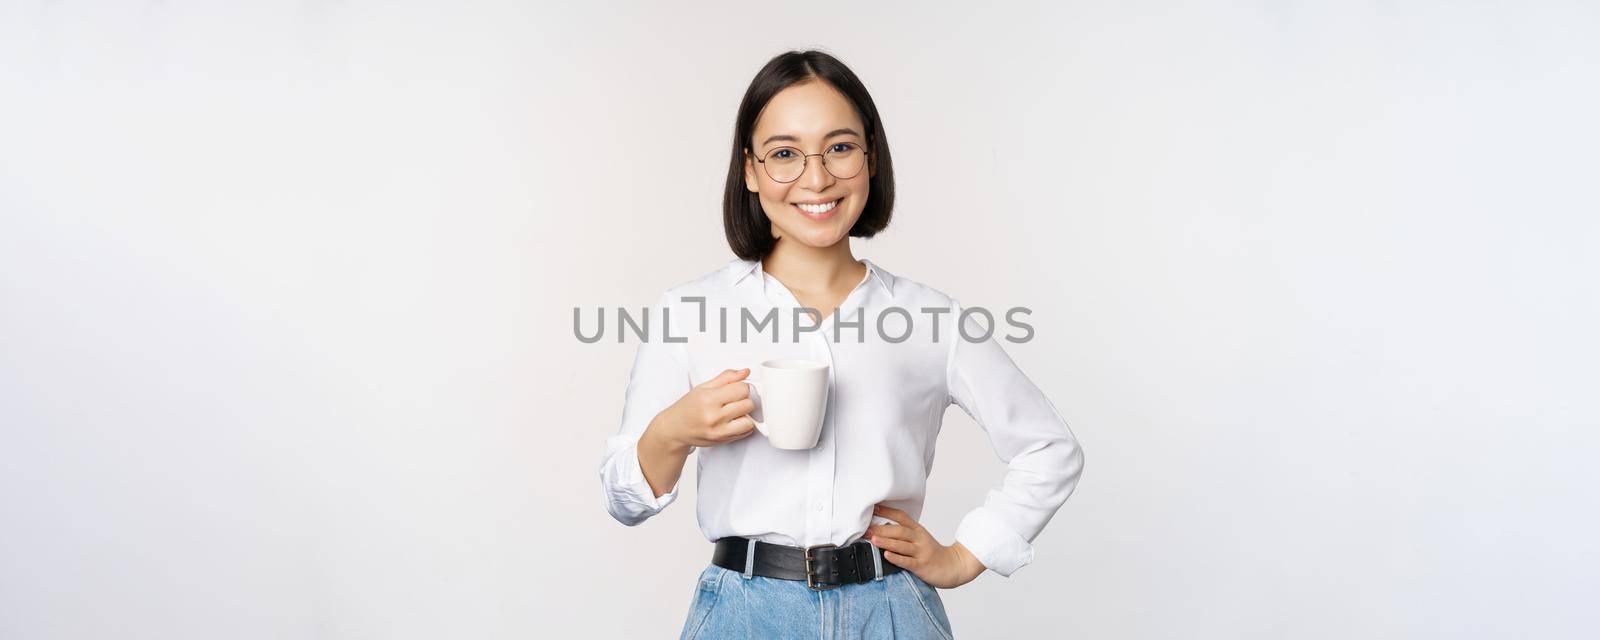 Happy young energetic asian woman smiling, drinking, holding cup mug of coffee, standing confident against white background.